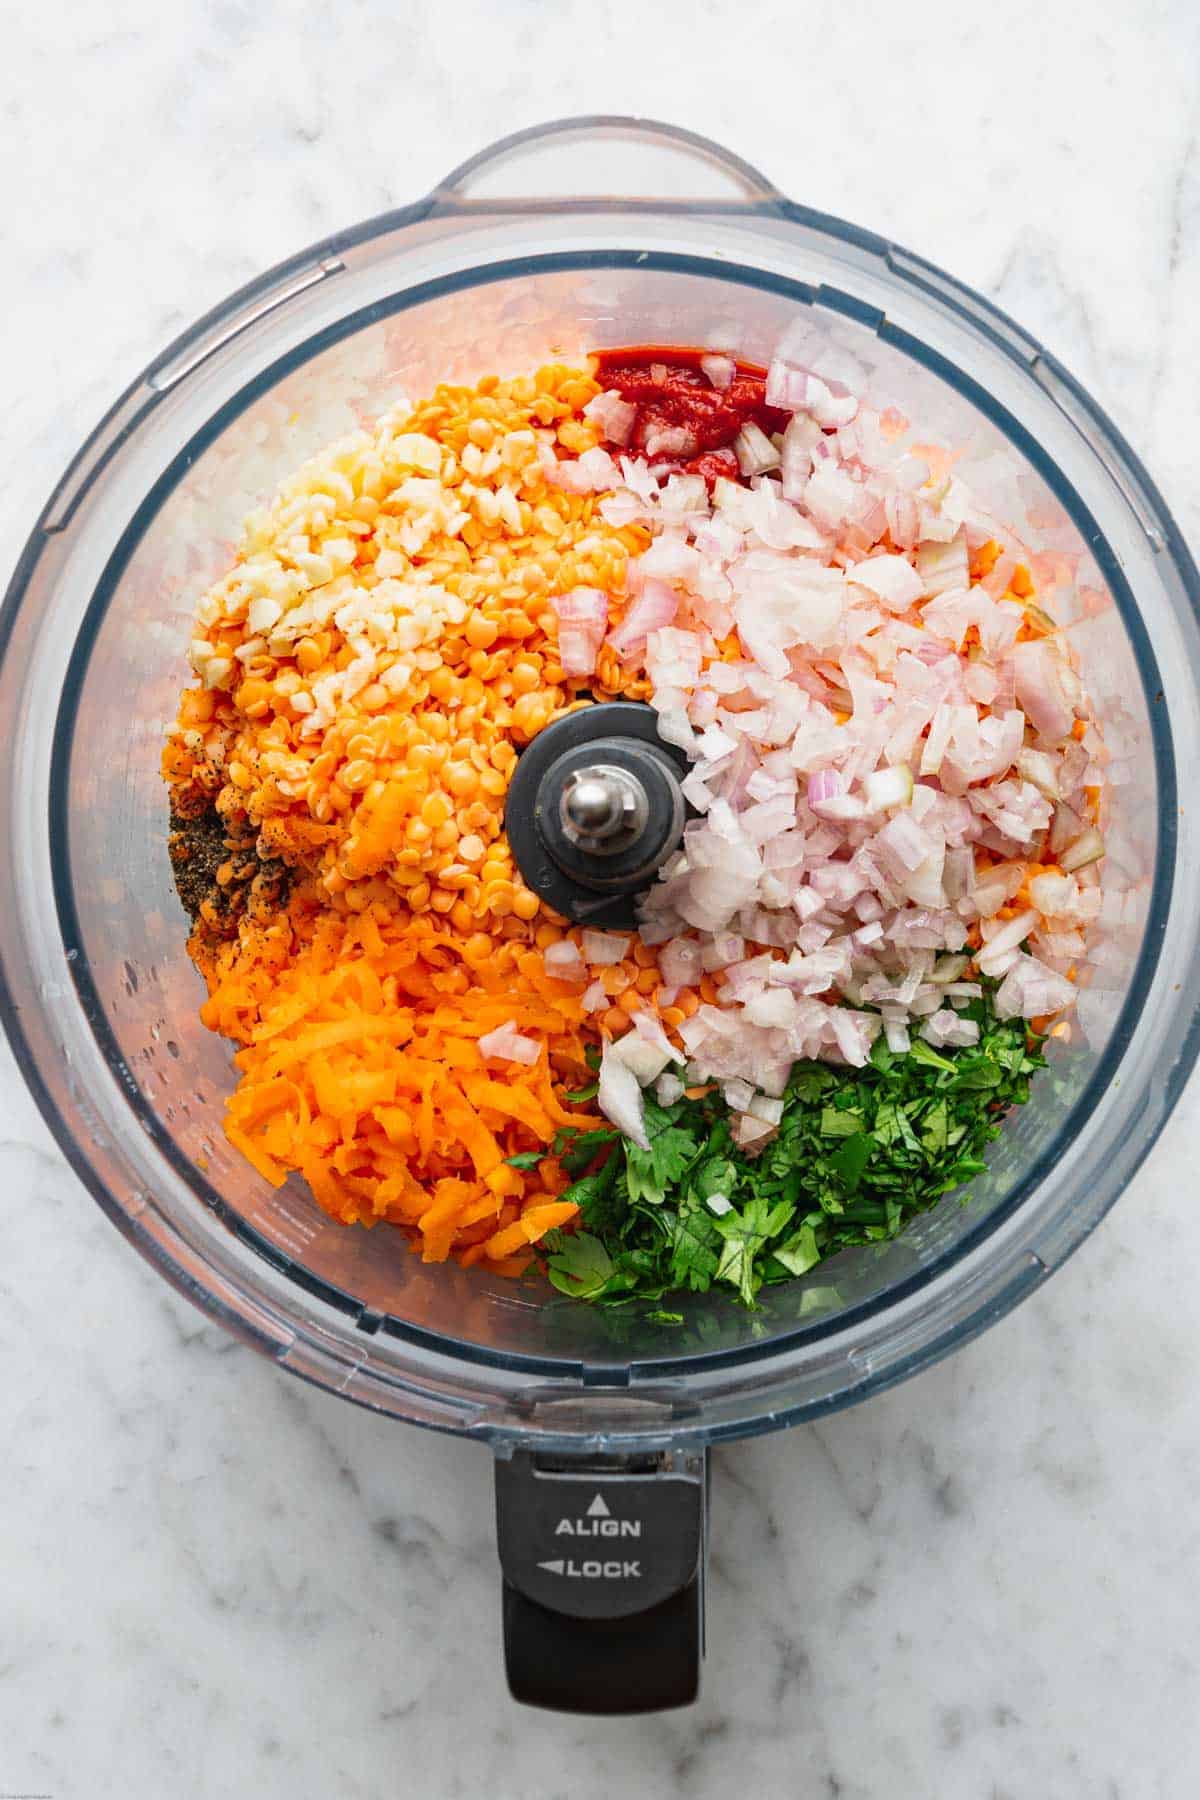 Soaked red lentils, carrots, cilantro, shallots, tomato paste, garlic, salt and pepper in a food processor.